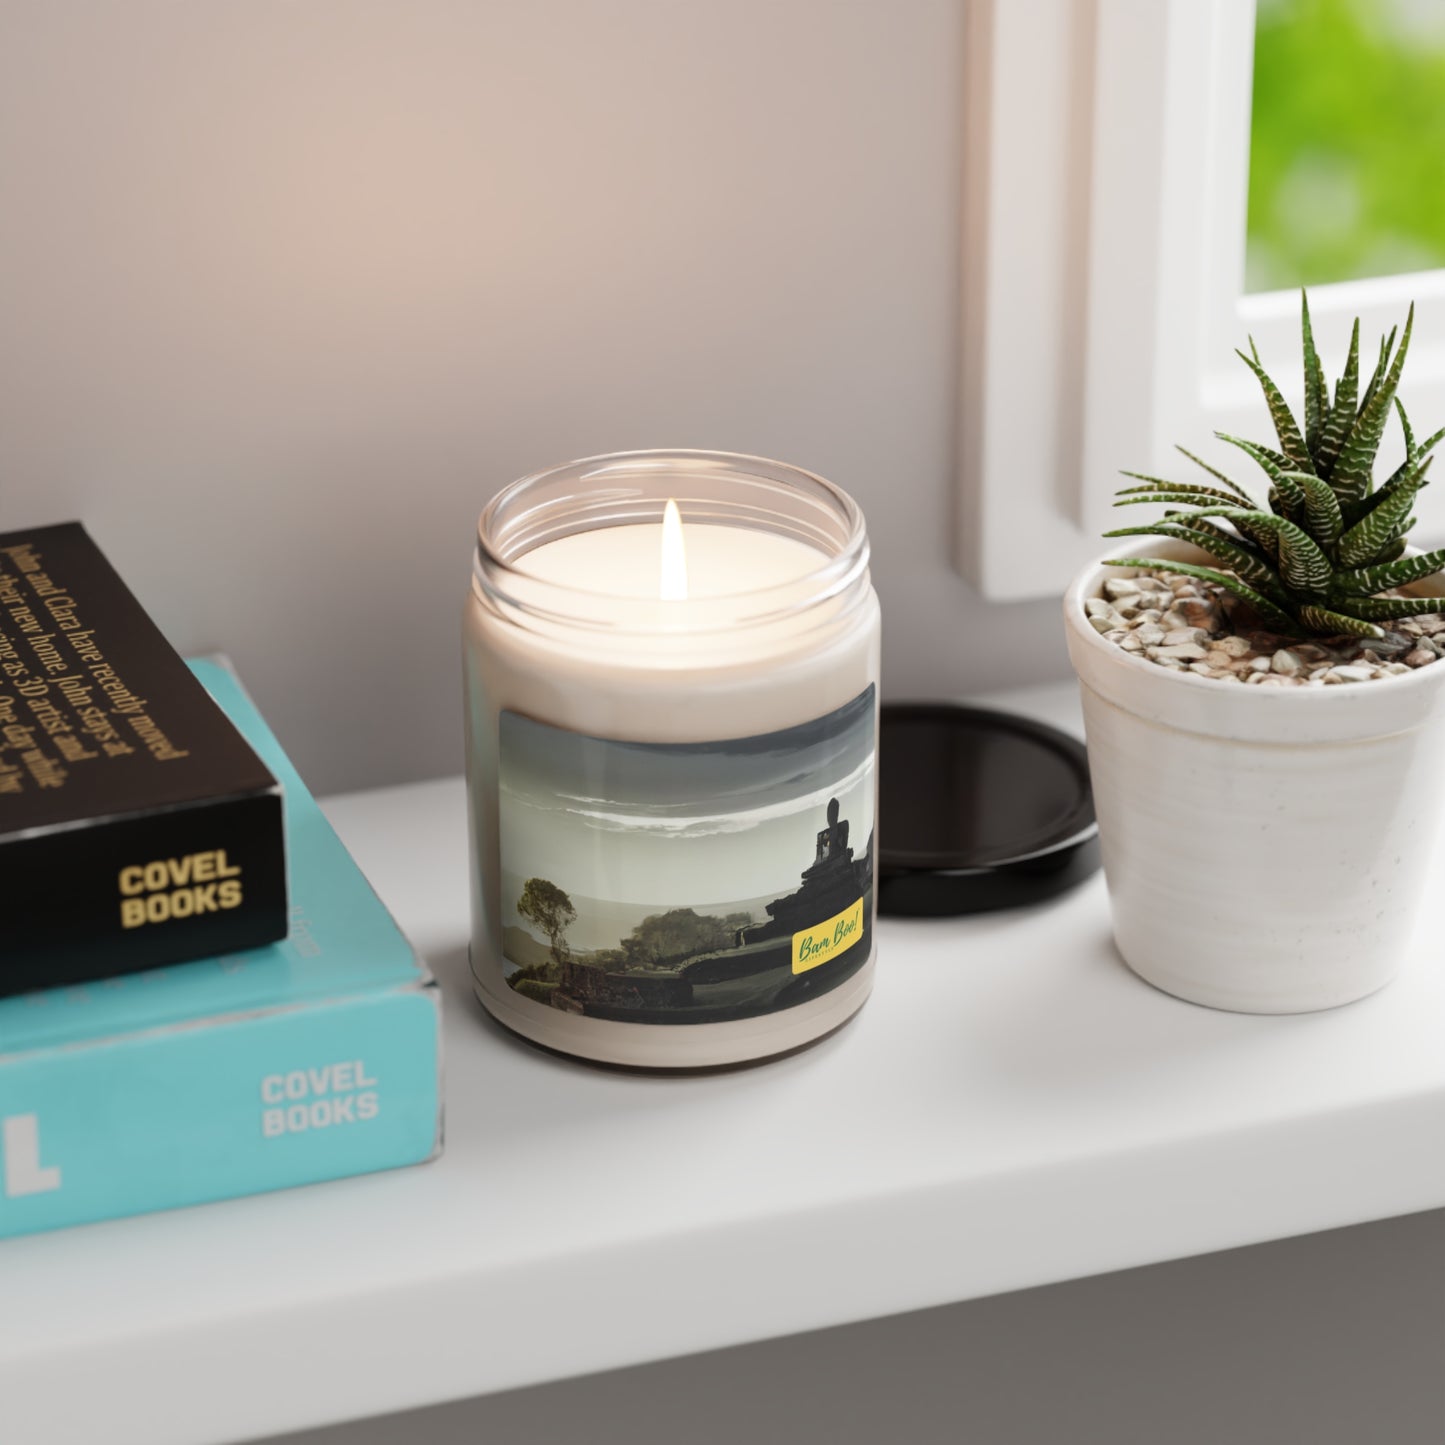 "Nature Evolved: Exploring the Intersection of Technology and Nature in Art" - Bam Boo! Lifestyle Eco-friendly Soy Candle